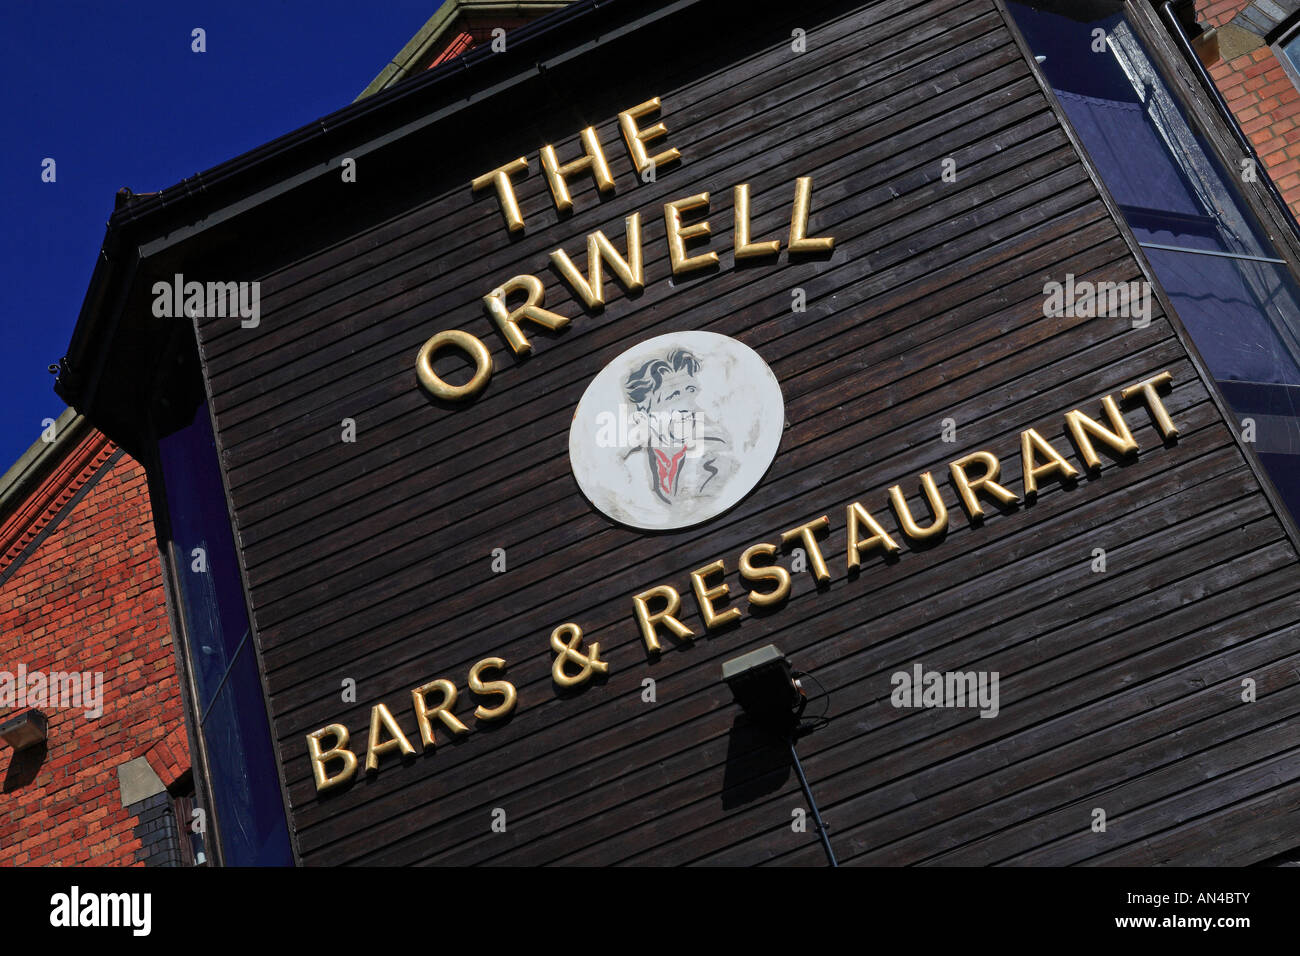 The (George) Orwell Bar And Restaurant, Wigan Pier Stock Photo